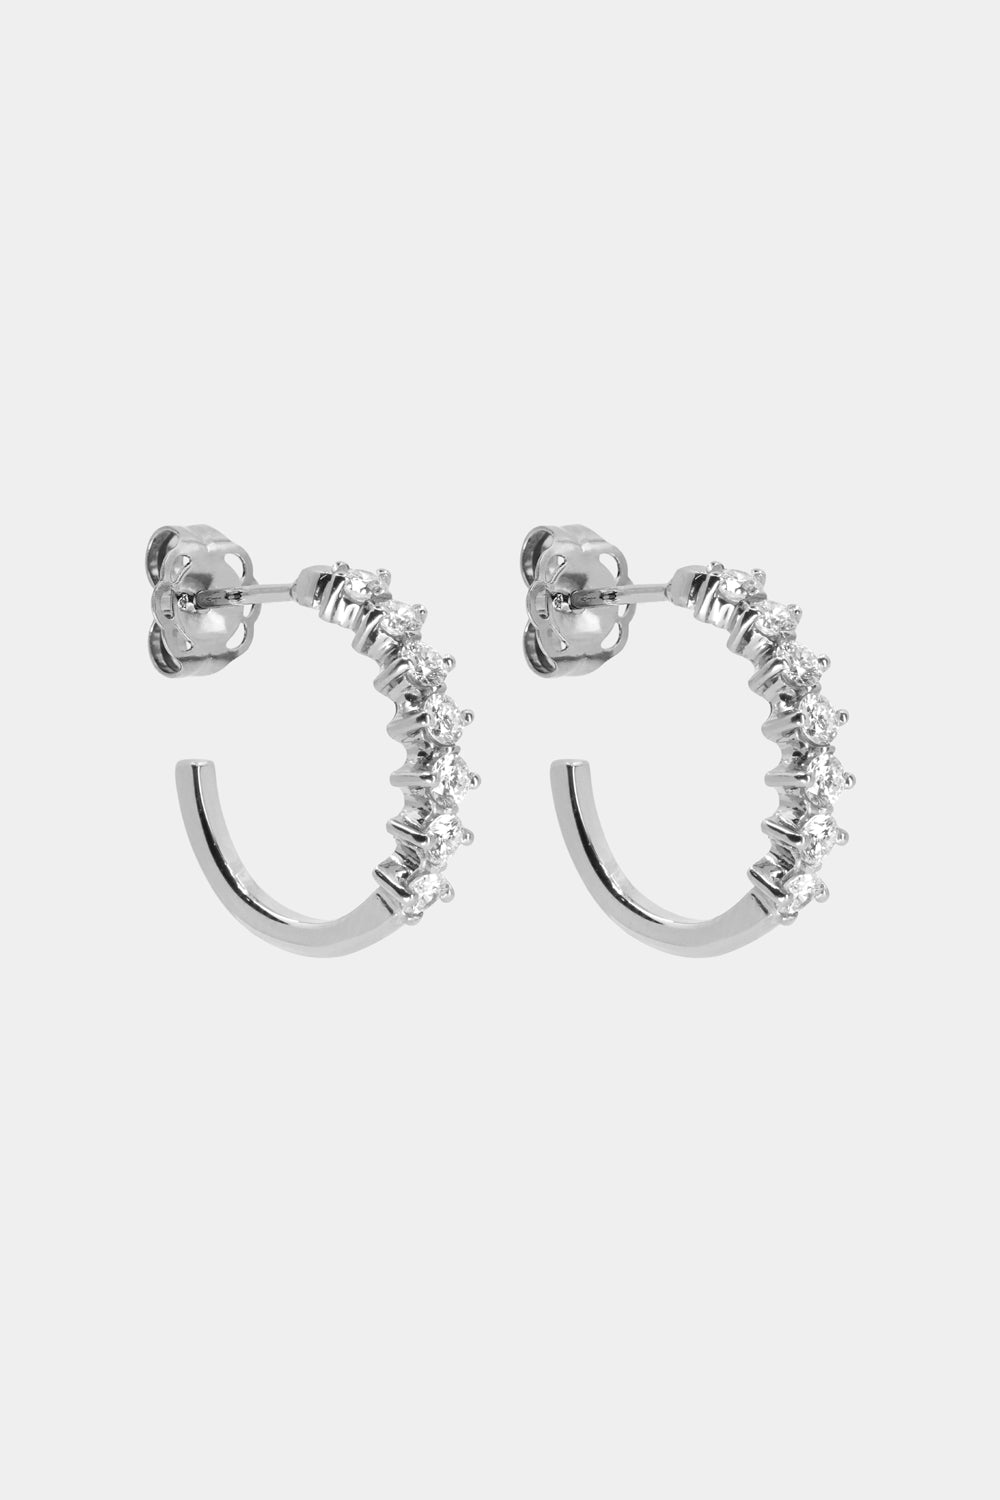 Buttercup Diamond Hoops | White Gold, More Options Available